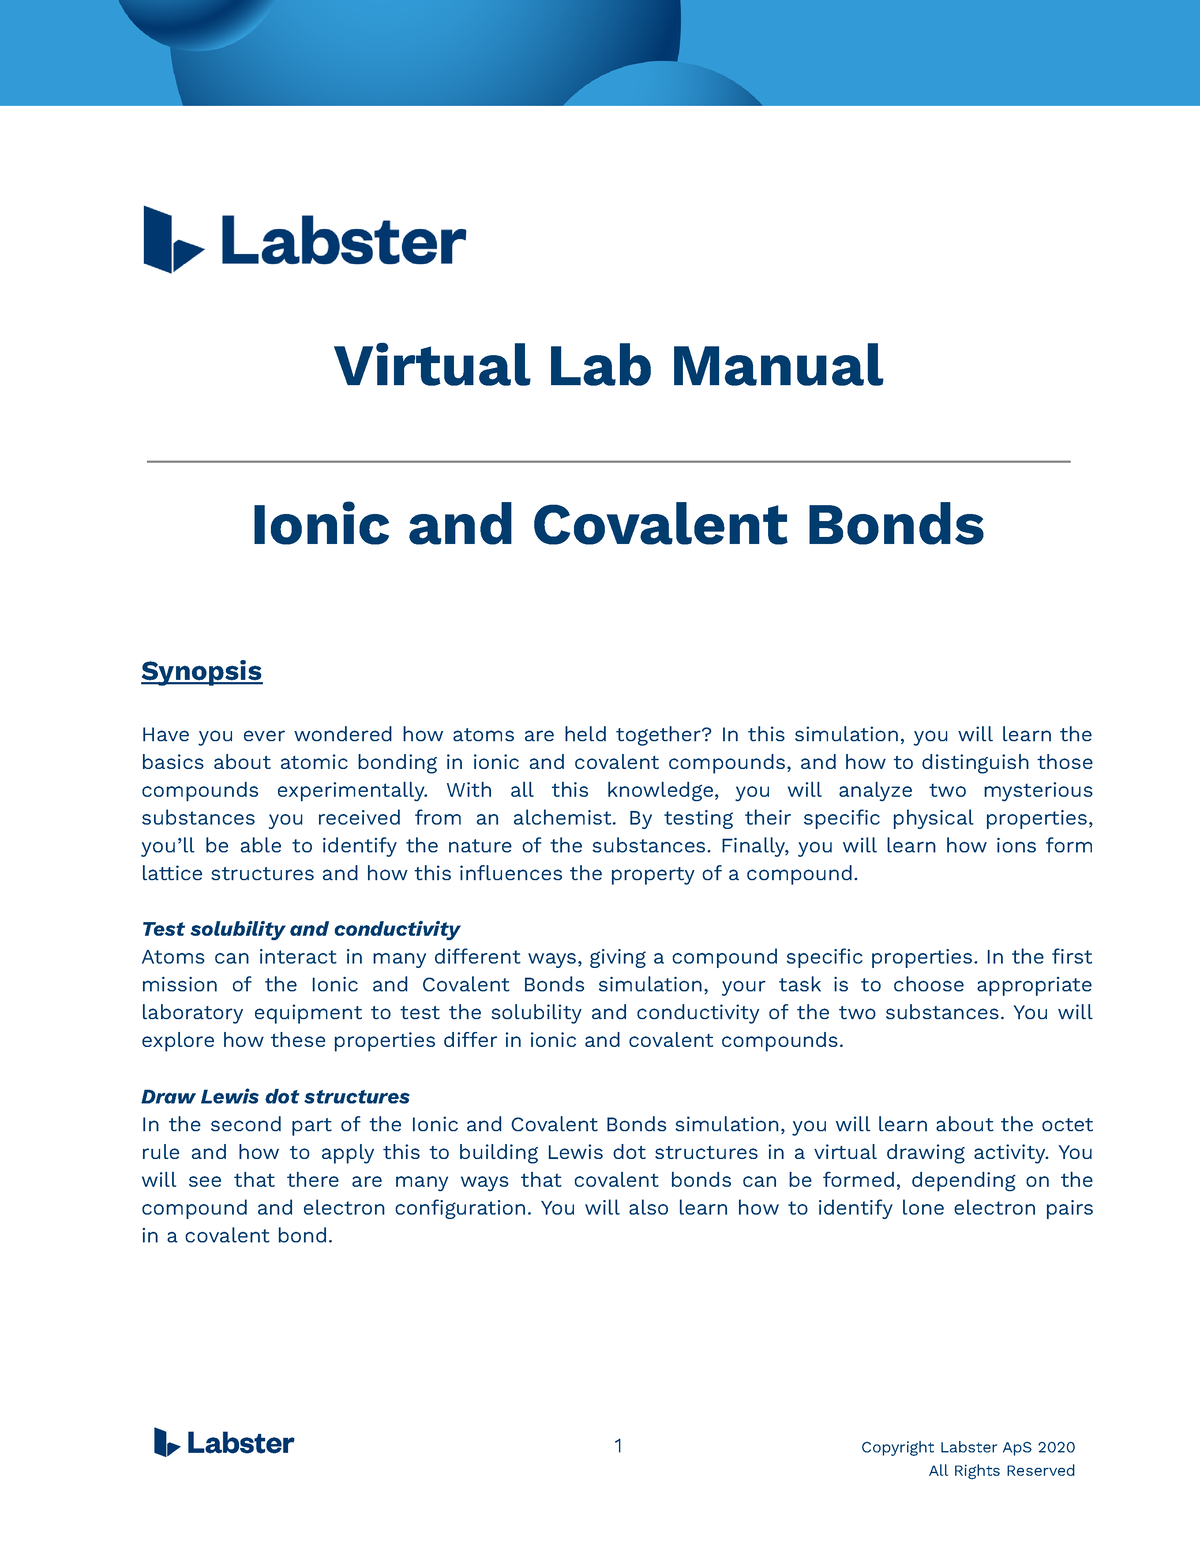 lab-manual-ionic-and-covalent-bonds-virtual-lab-manual-ionic-and-covalent-bonds-synopsis-have